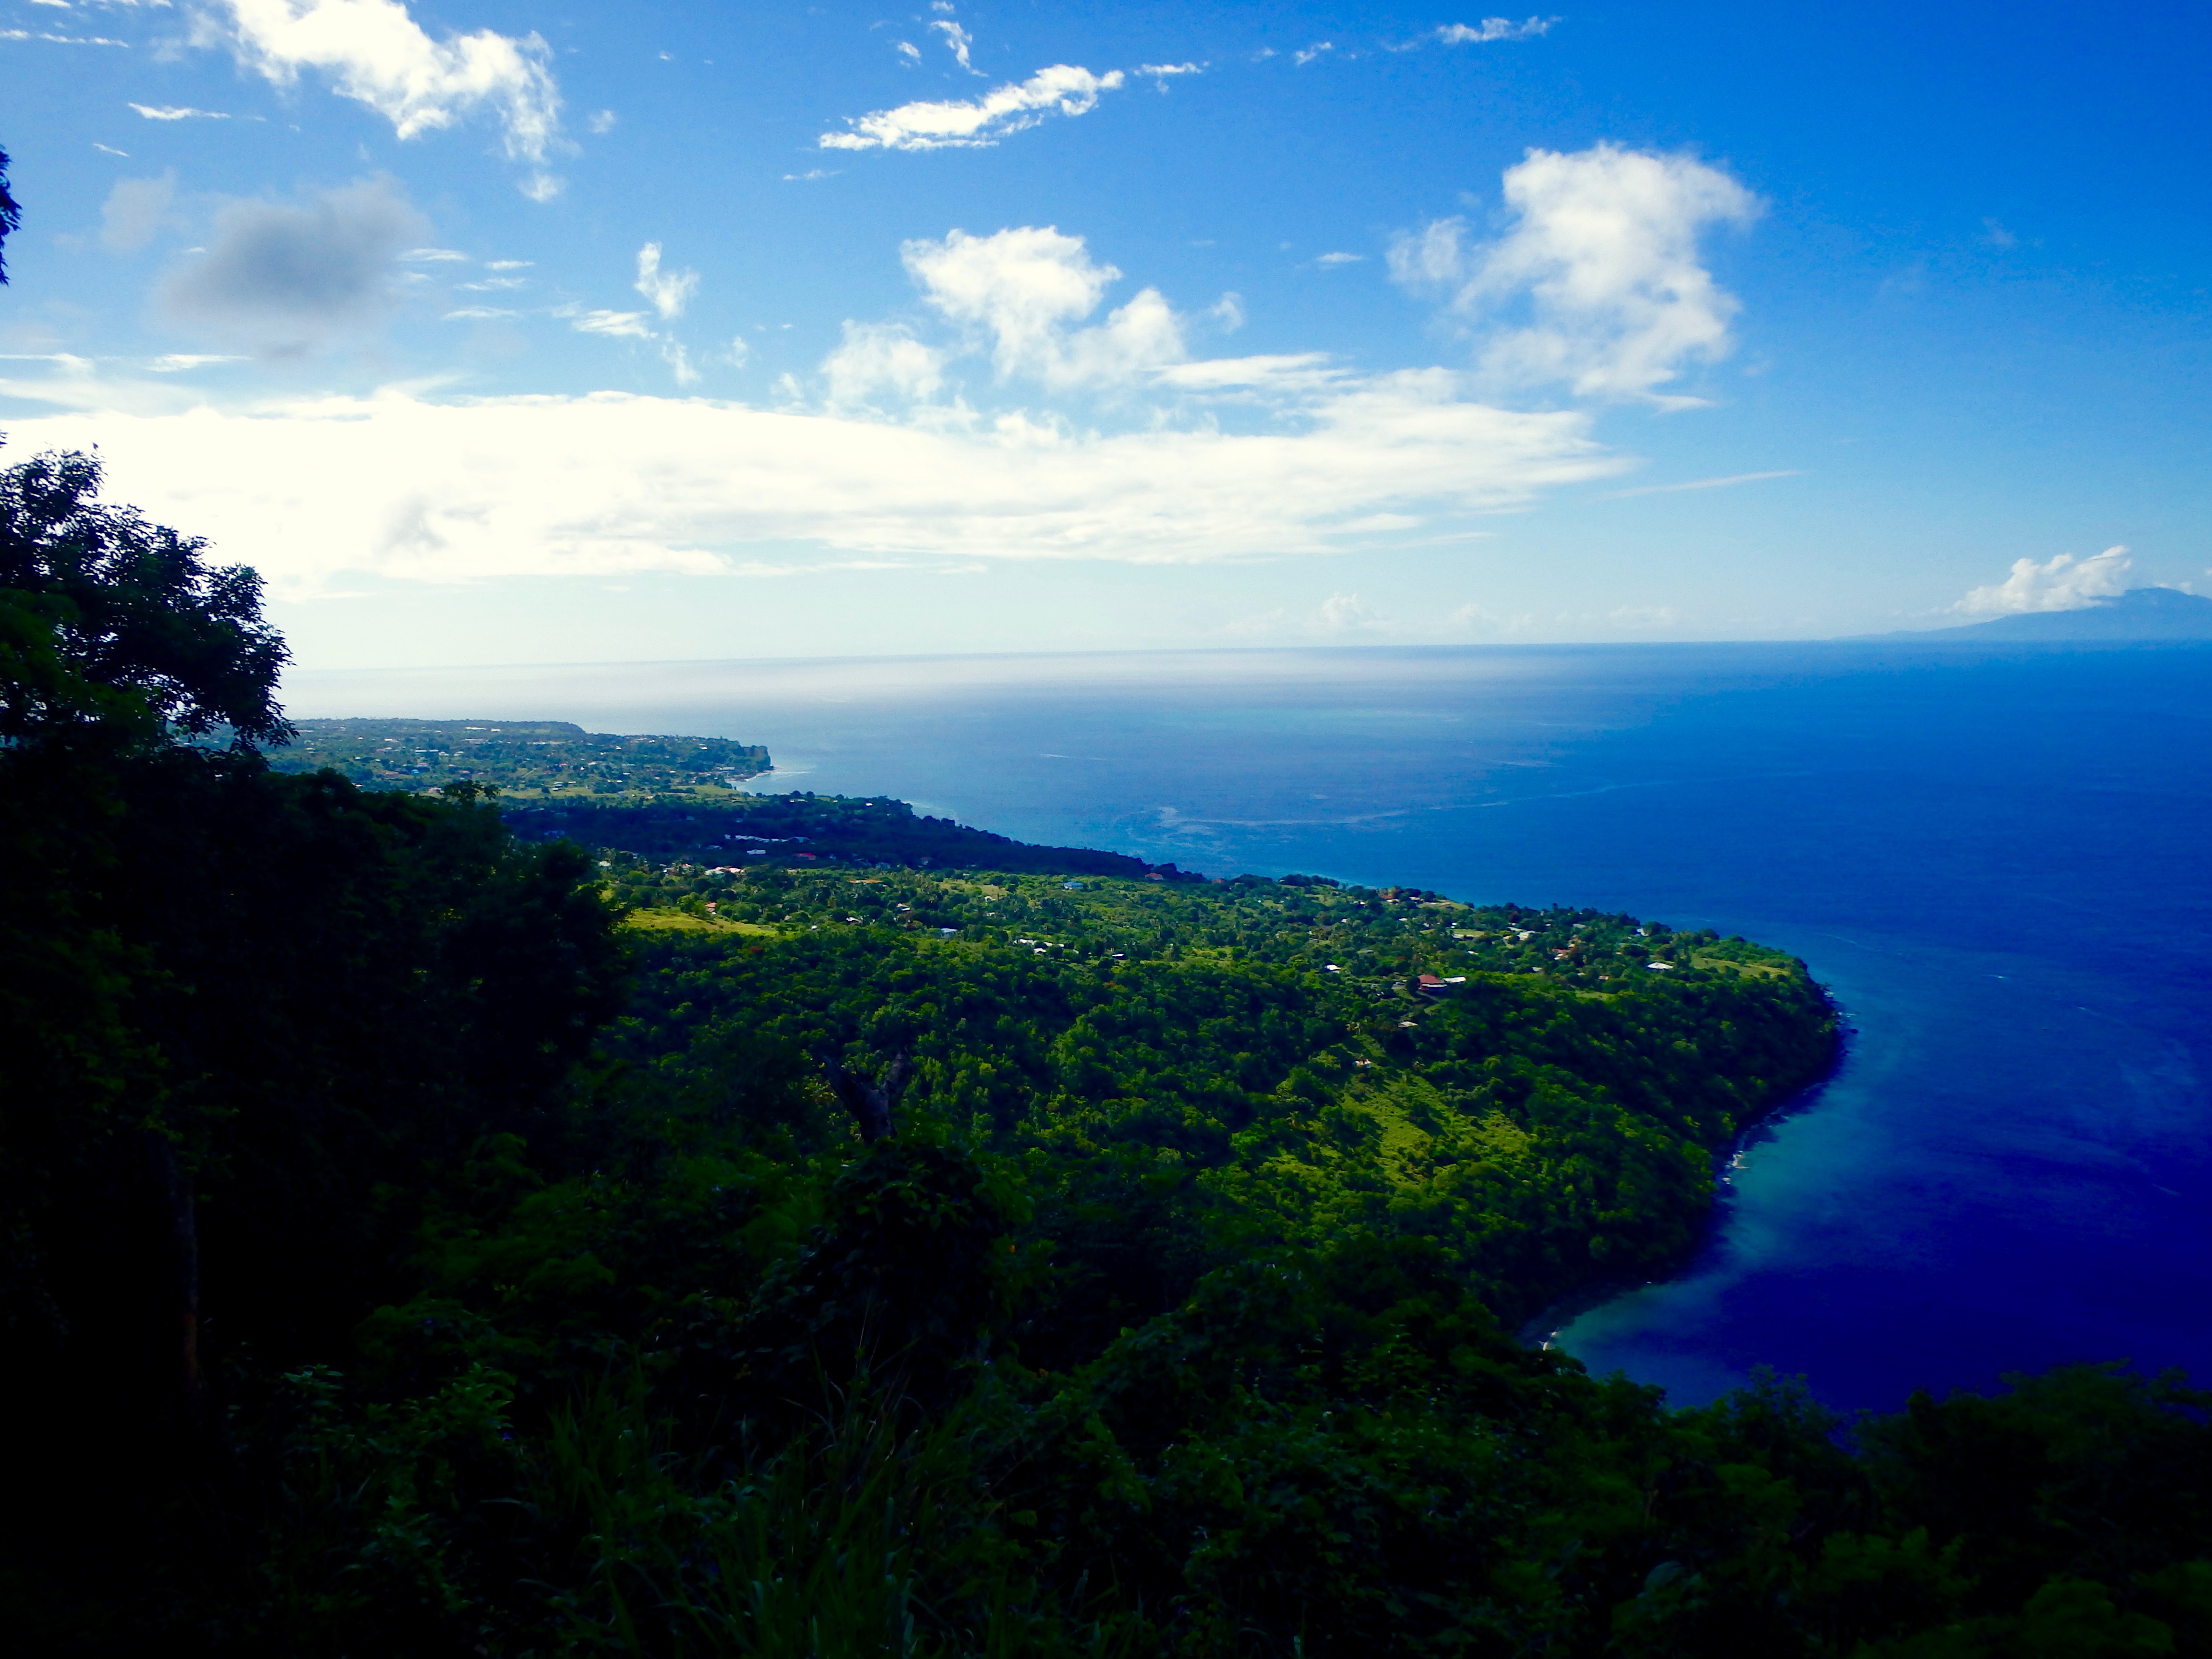 HIKING AND CLIMBING IN ST. LUCIA